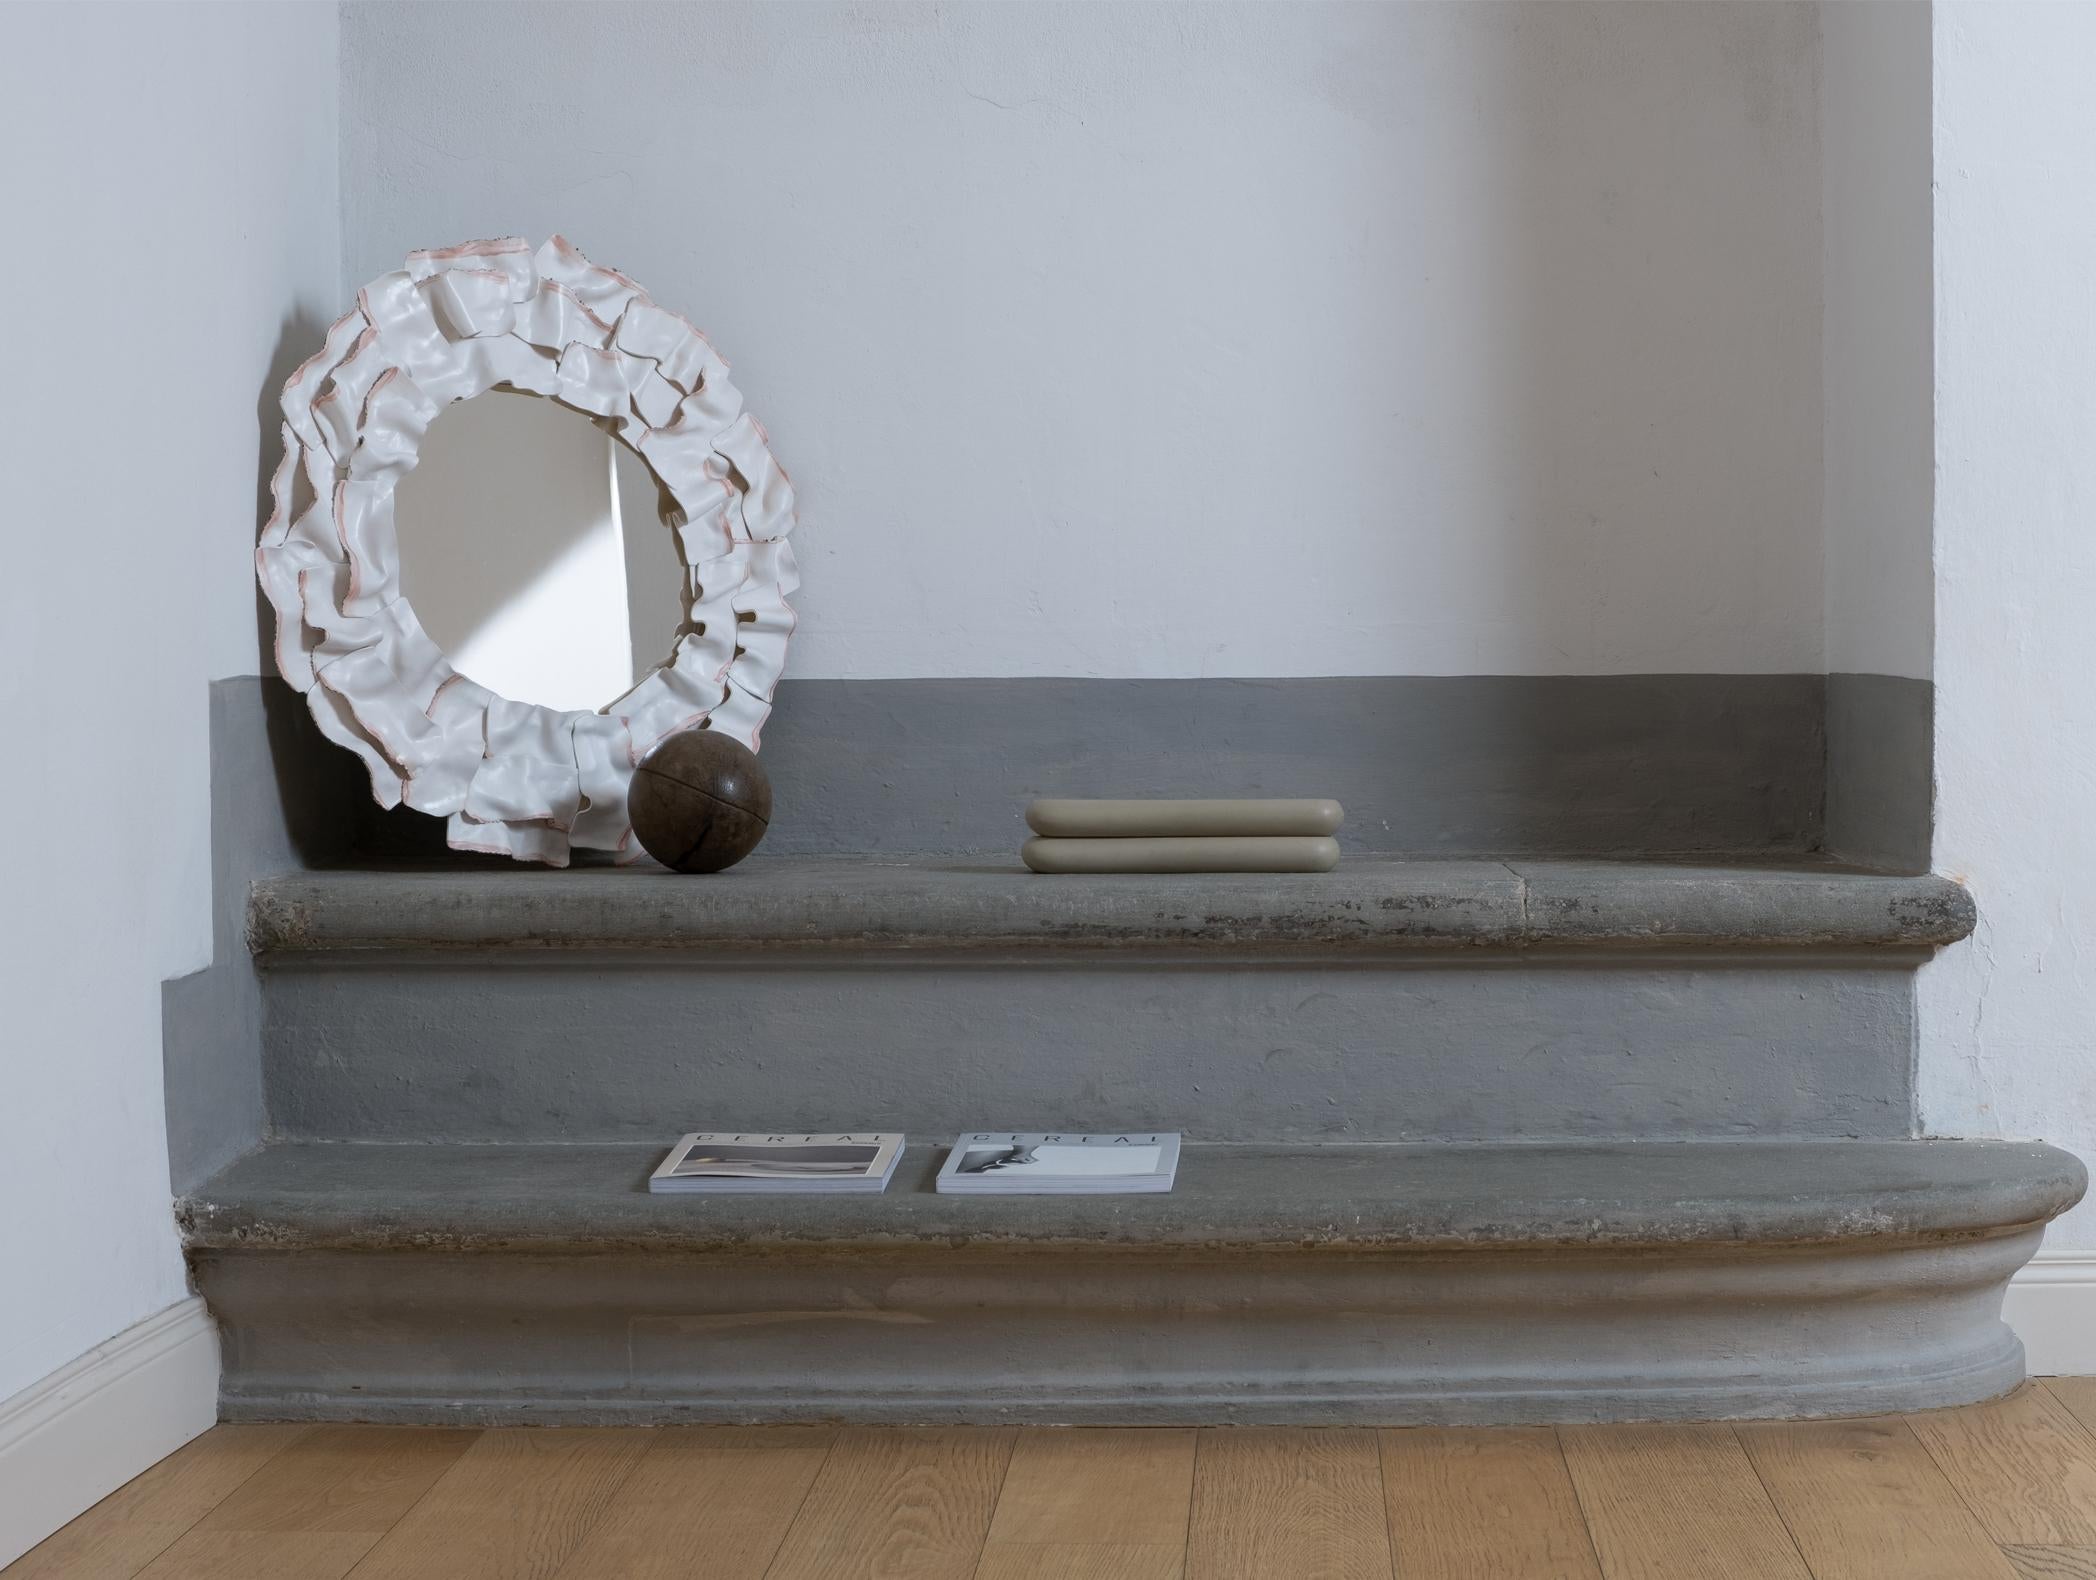 Affettati Mirrors “MORTADELLA” by Nicole Valenti

NIVA design presents the “Affettati Mirrors” collection by reinterpreting the mirror in a contemporary and provocative way, creating a line of ceramic frames in a mix of tradition and